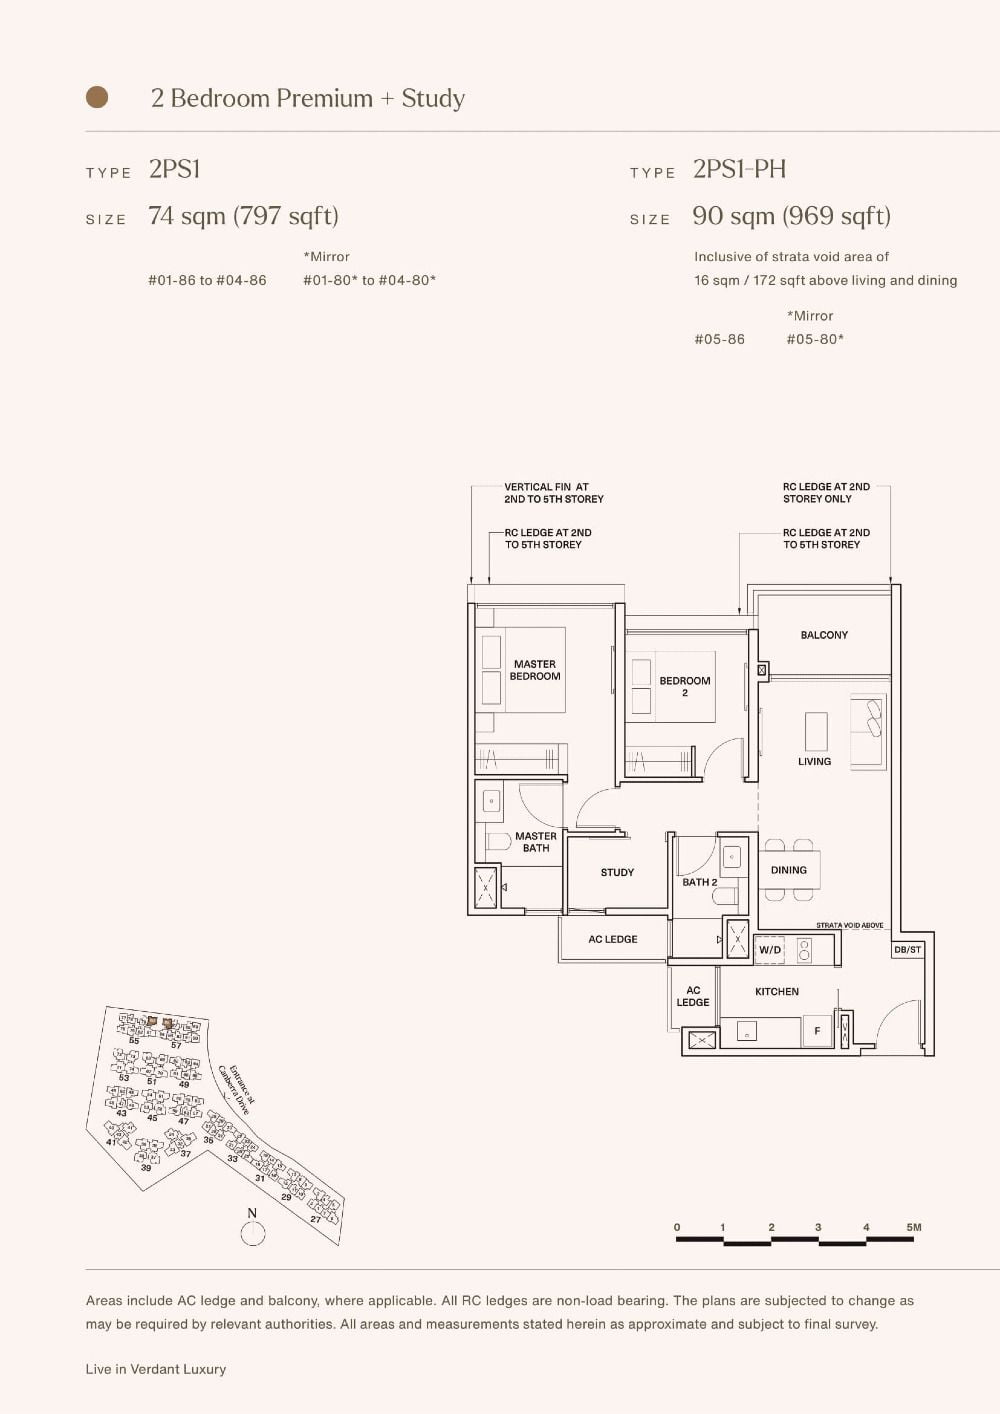 fp-the-watergardens-at-canberra-2ps1-floor-plan.jpg